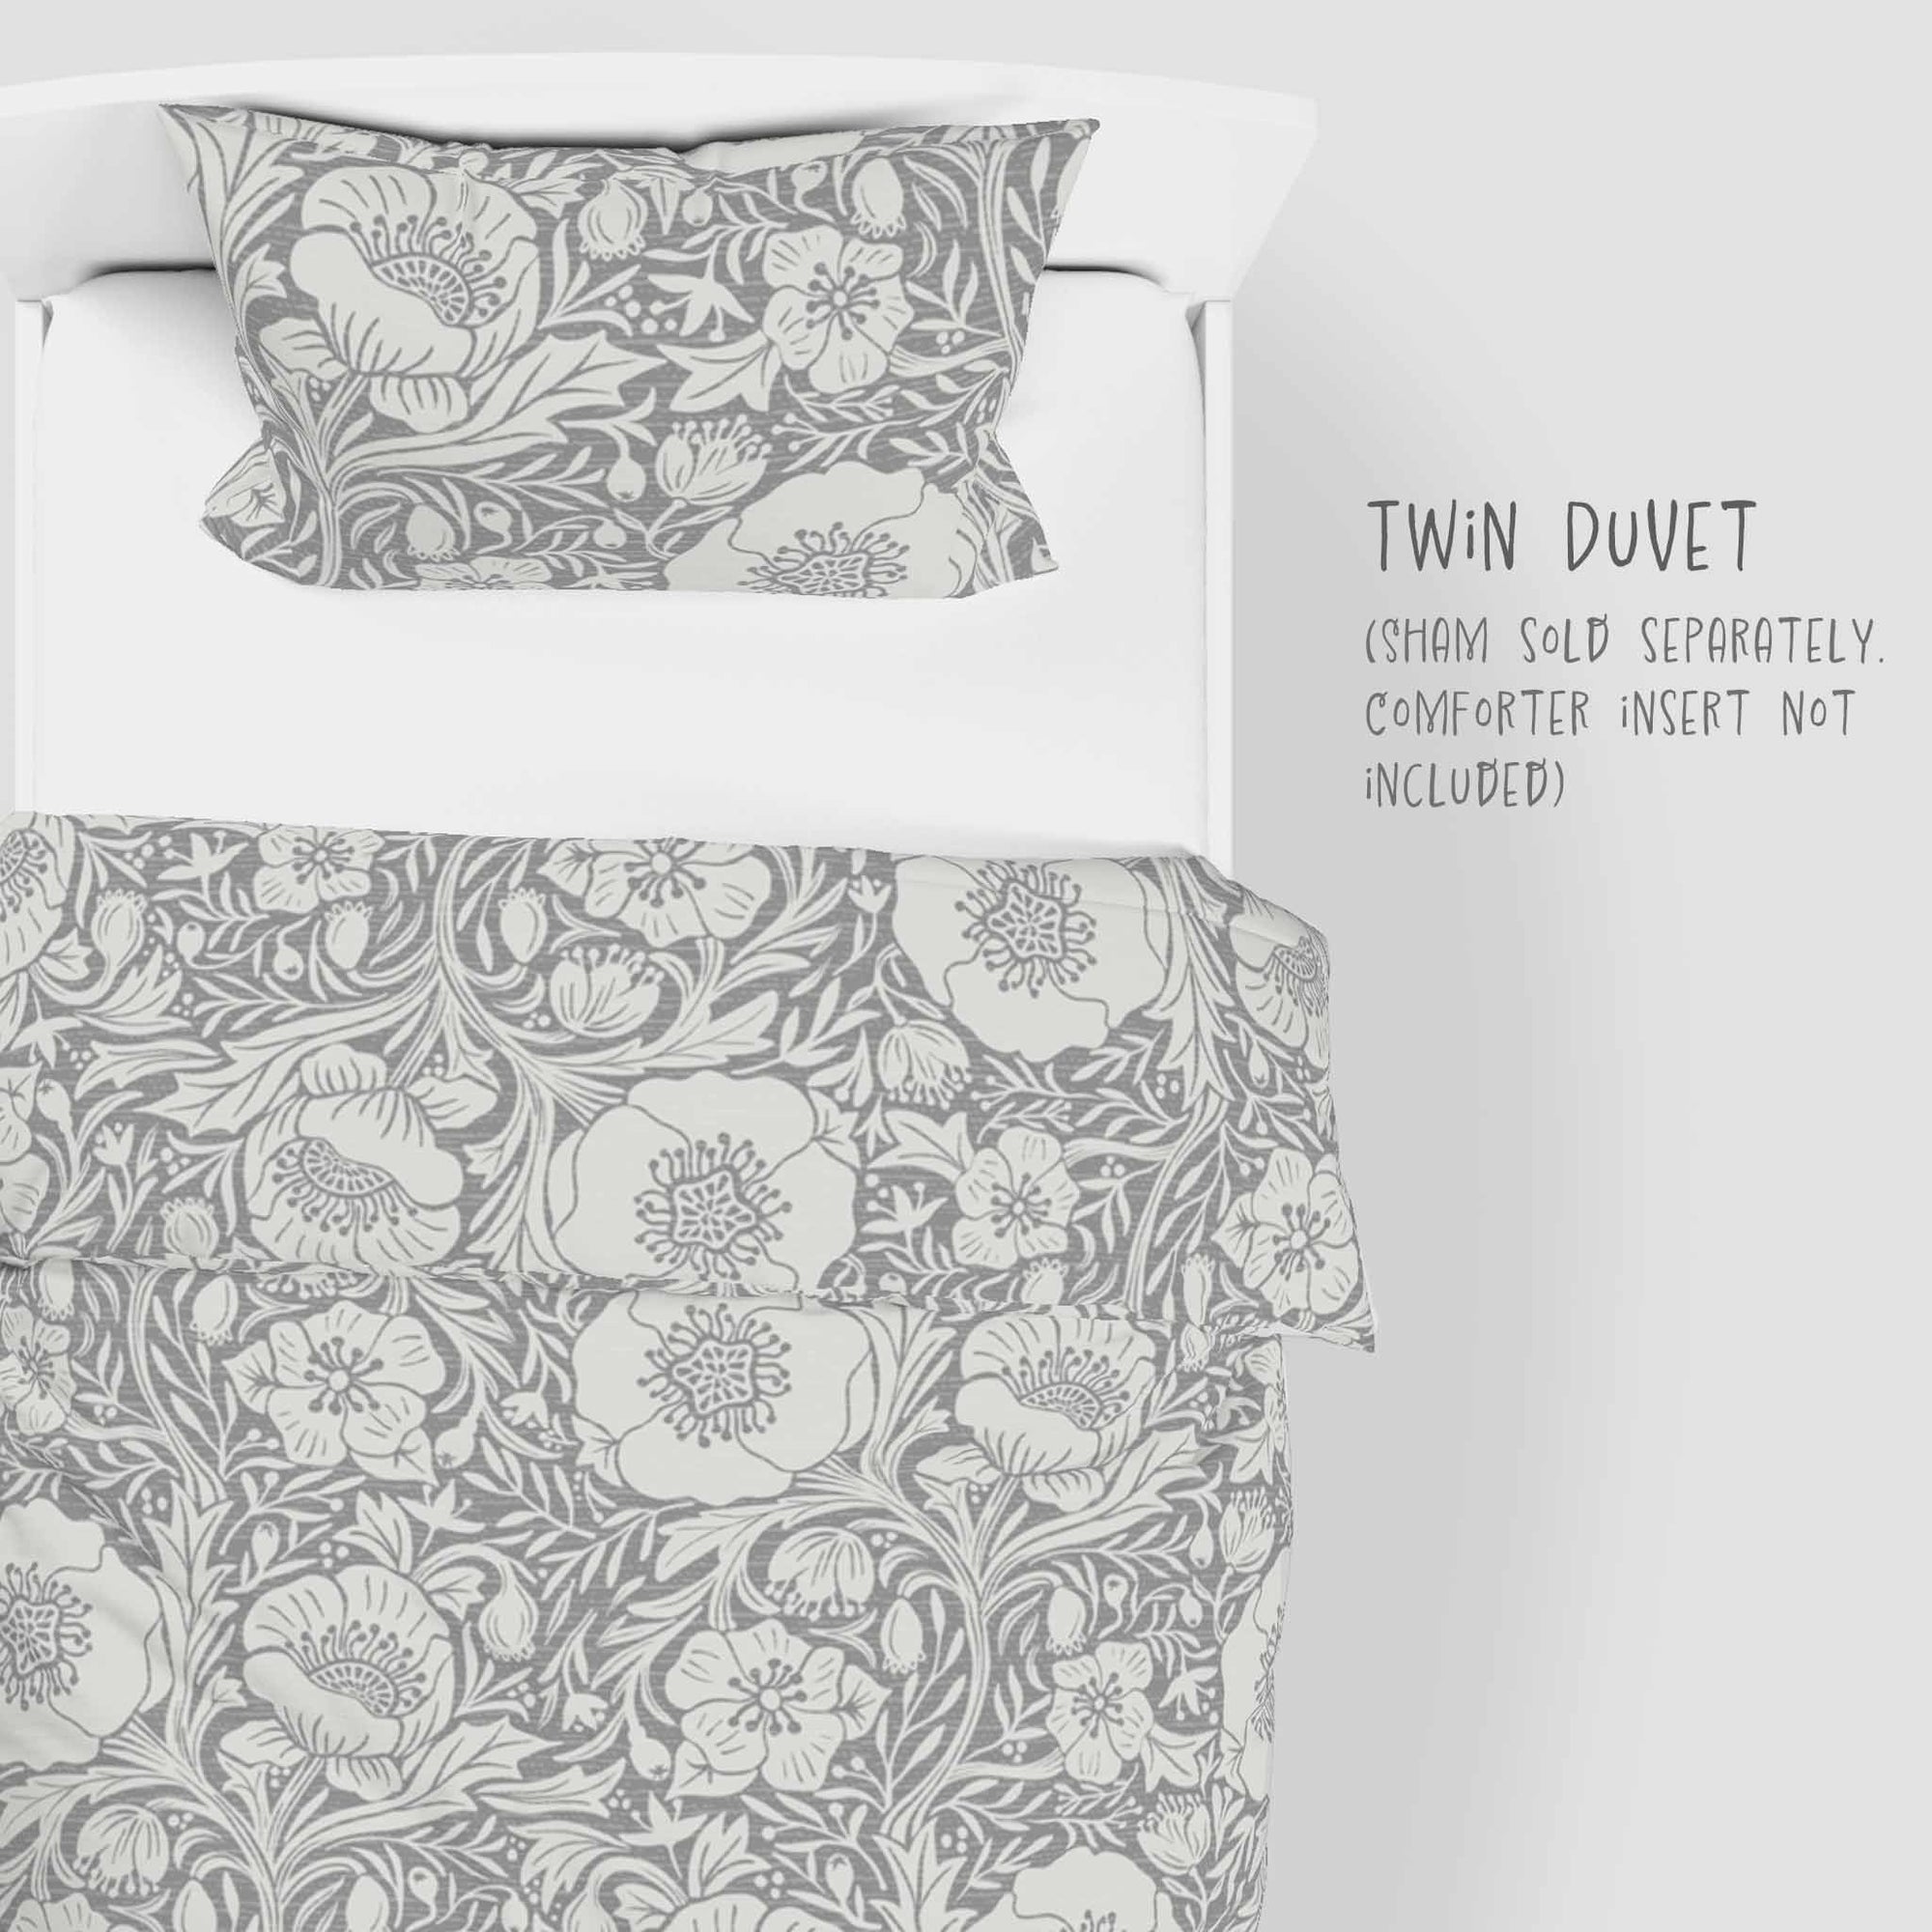 Poppies on gray background 100% Cotton Duvet Cover: Twin and Twin XL sizes.